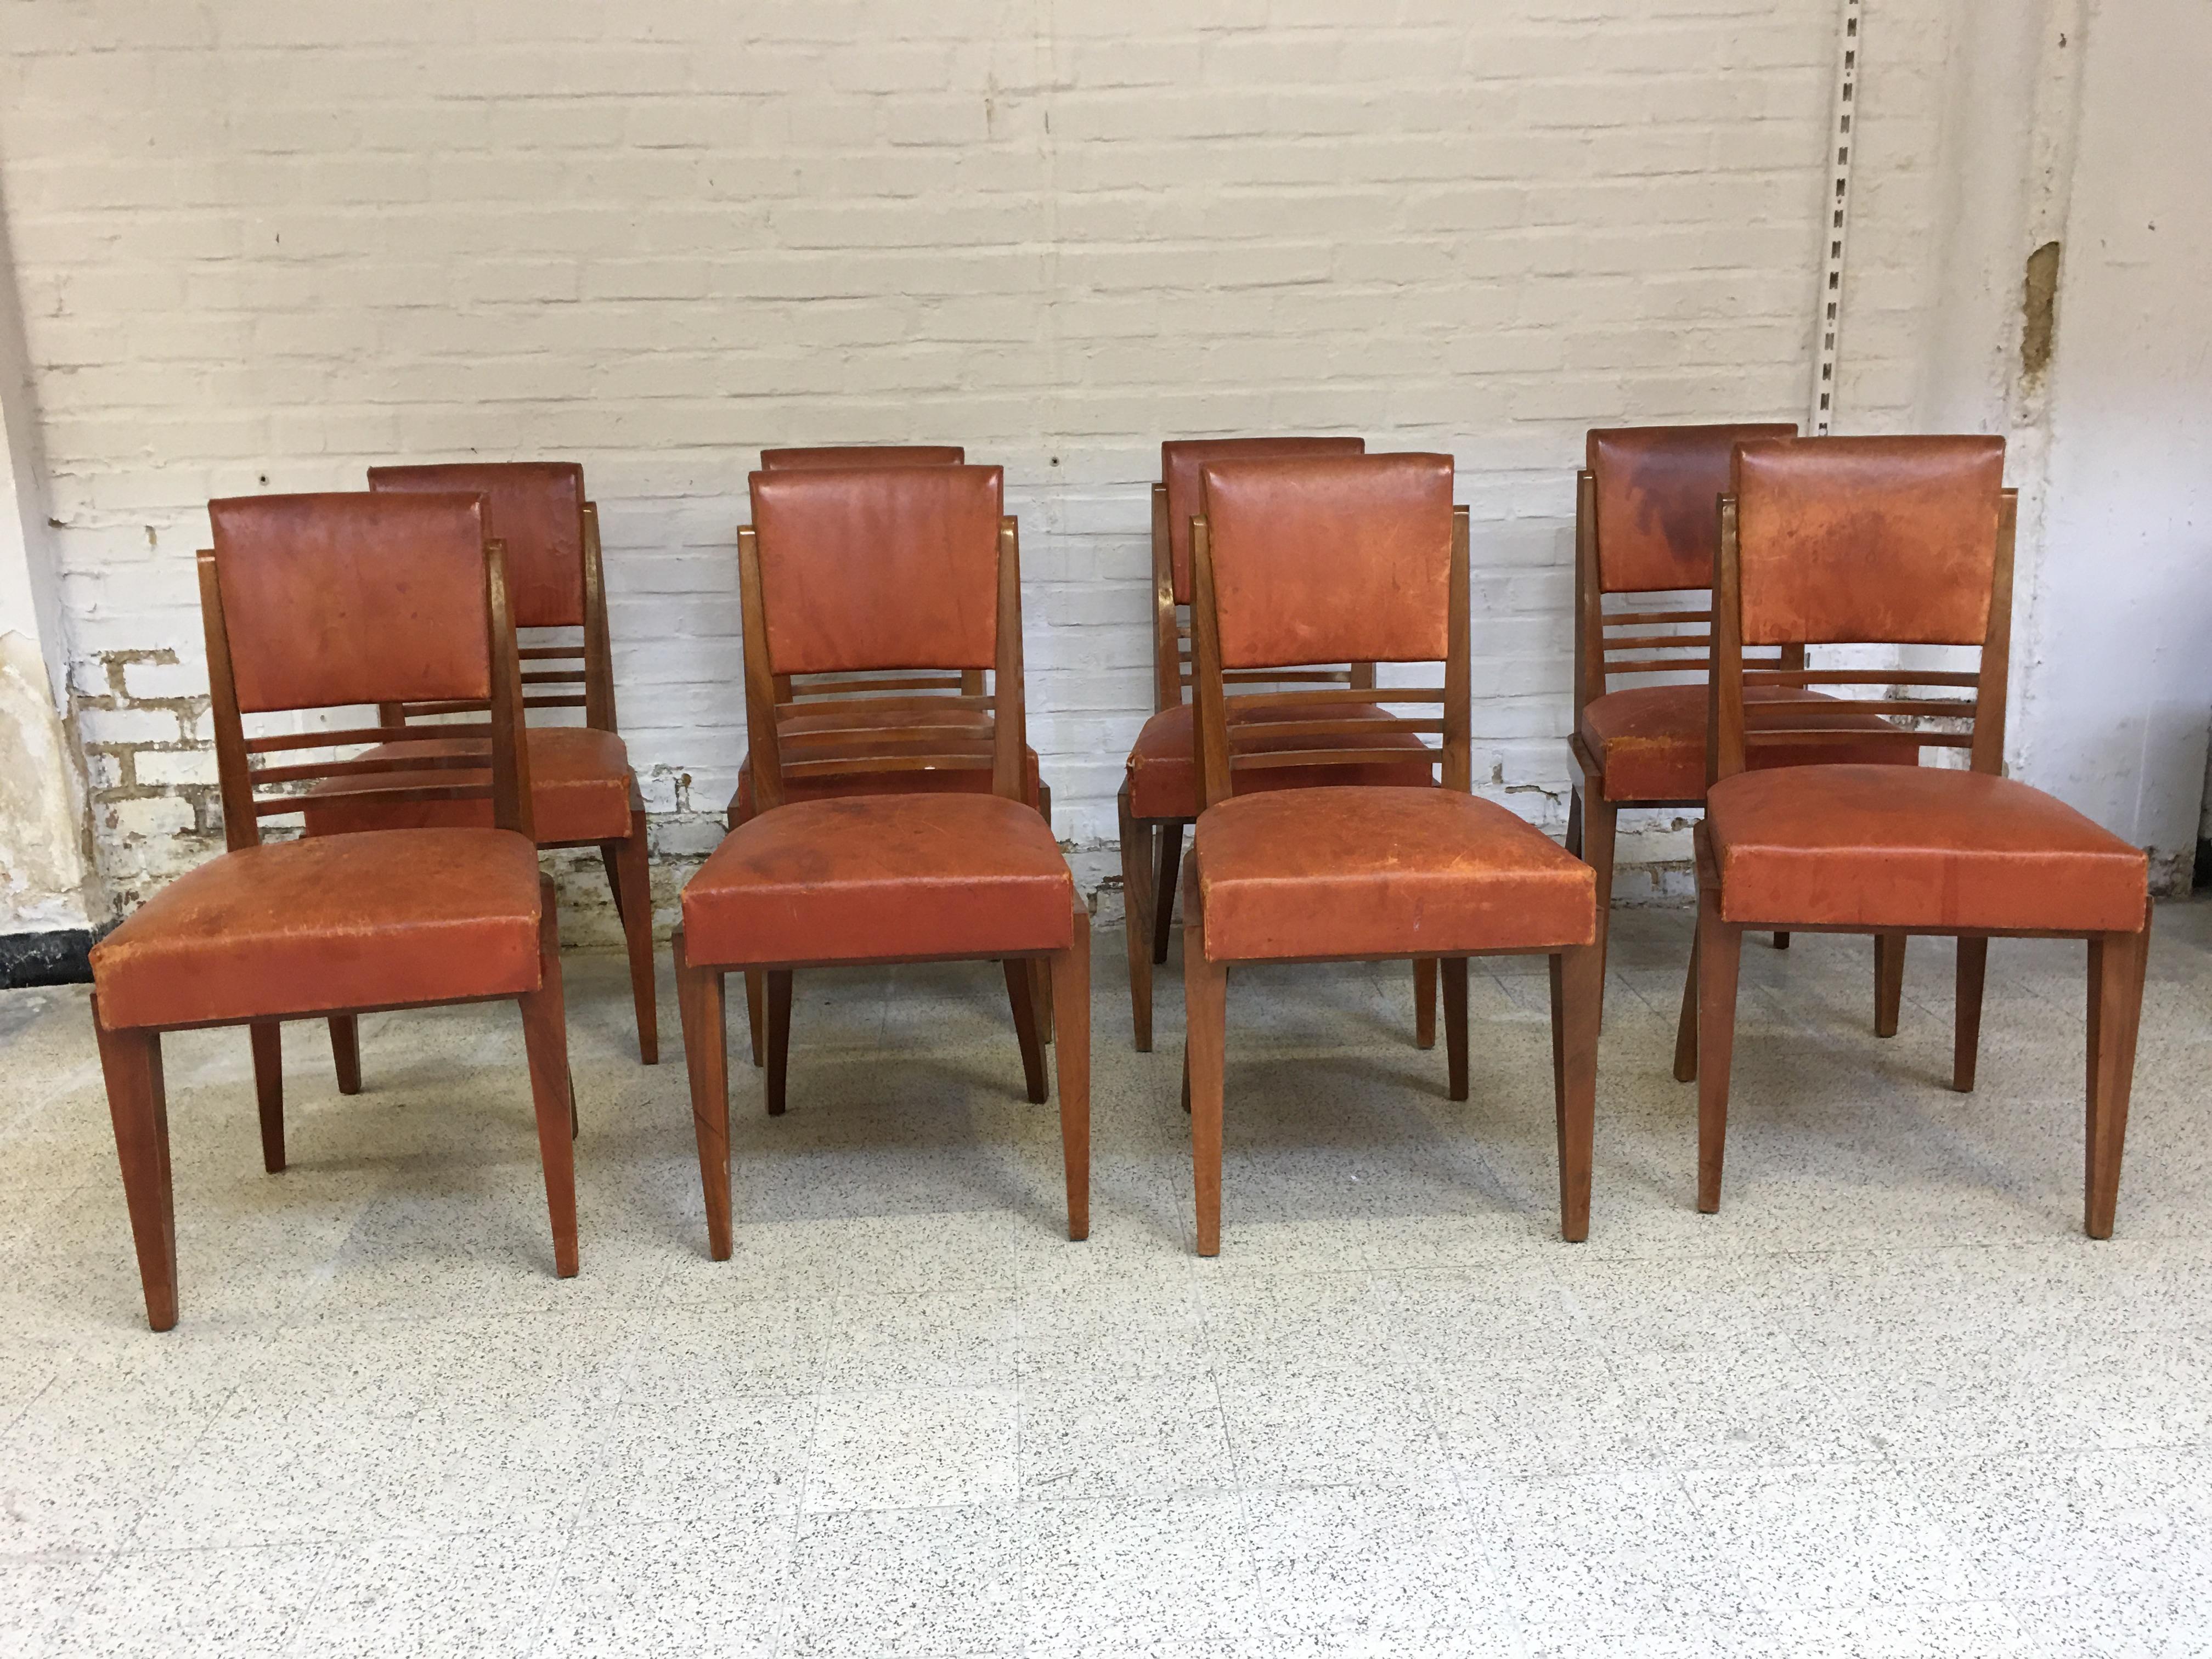 Rare suite of 8 Art Deco chairs and 2 walnut and leather armchairs in the style of Maxime Old, circa 1930-1940.
Dimensions in centimeters
Armchairs: H 90, SH 48, W 54, D 50
Chairs: H 90, SH 48, W 48, D 46.